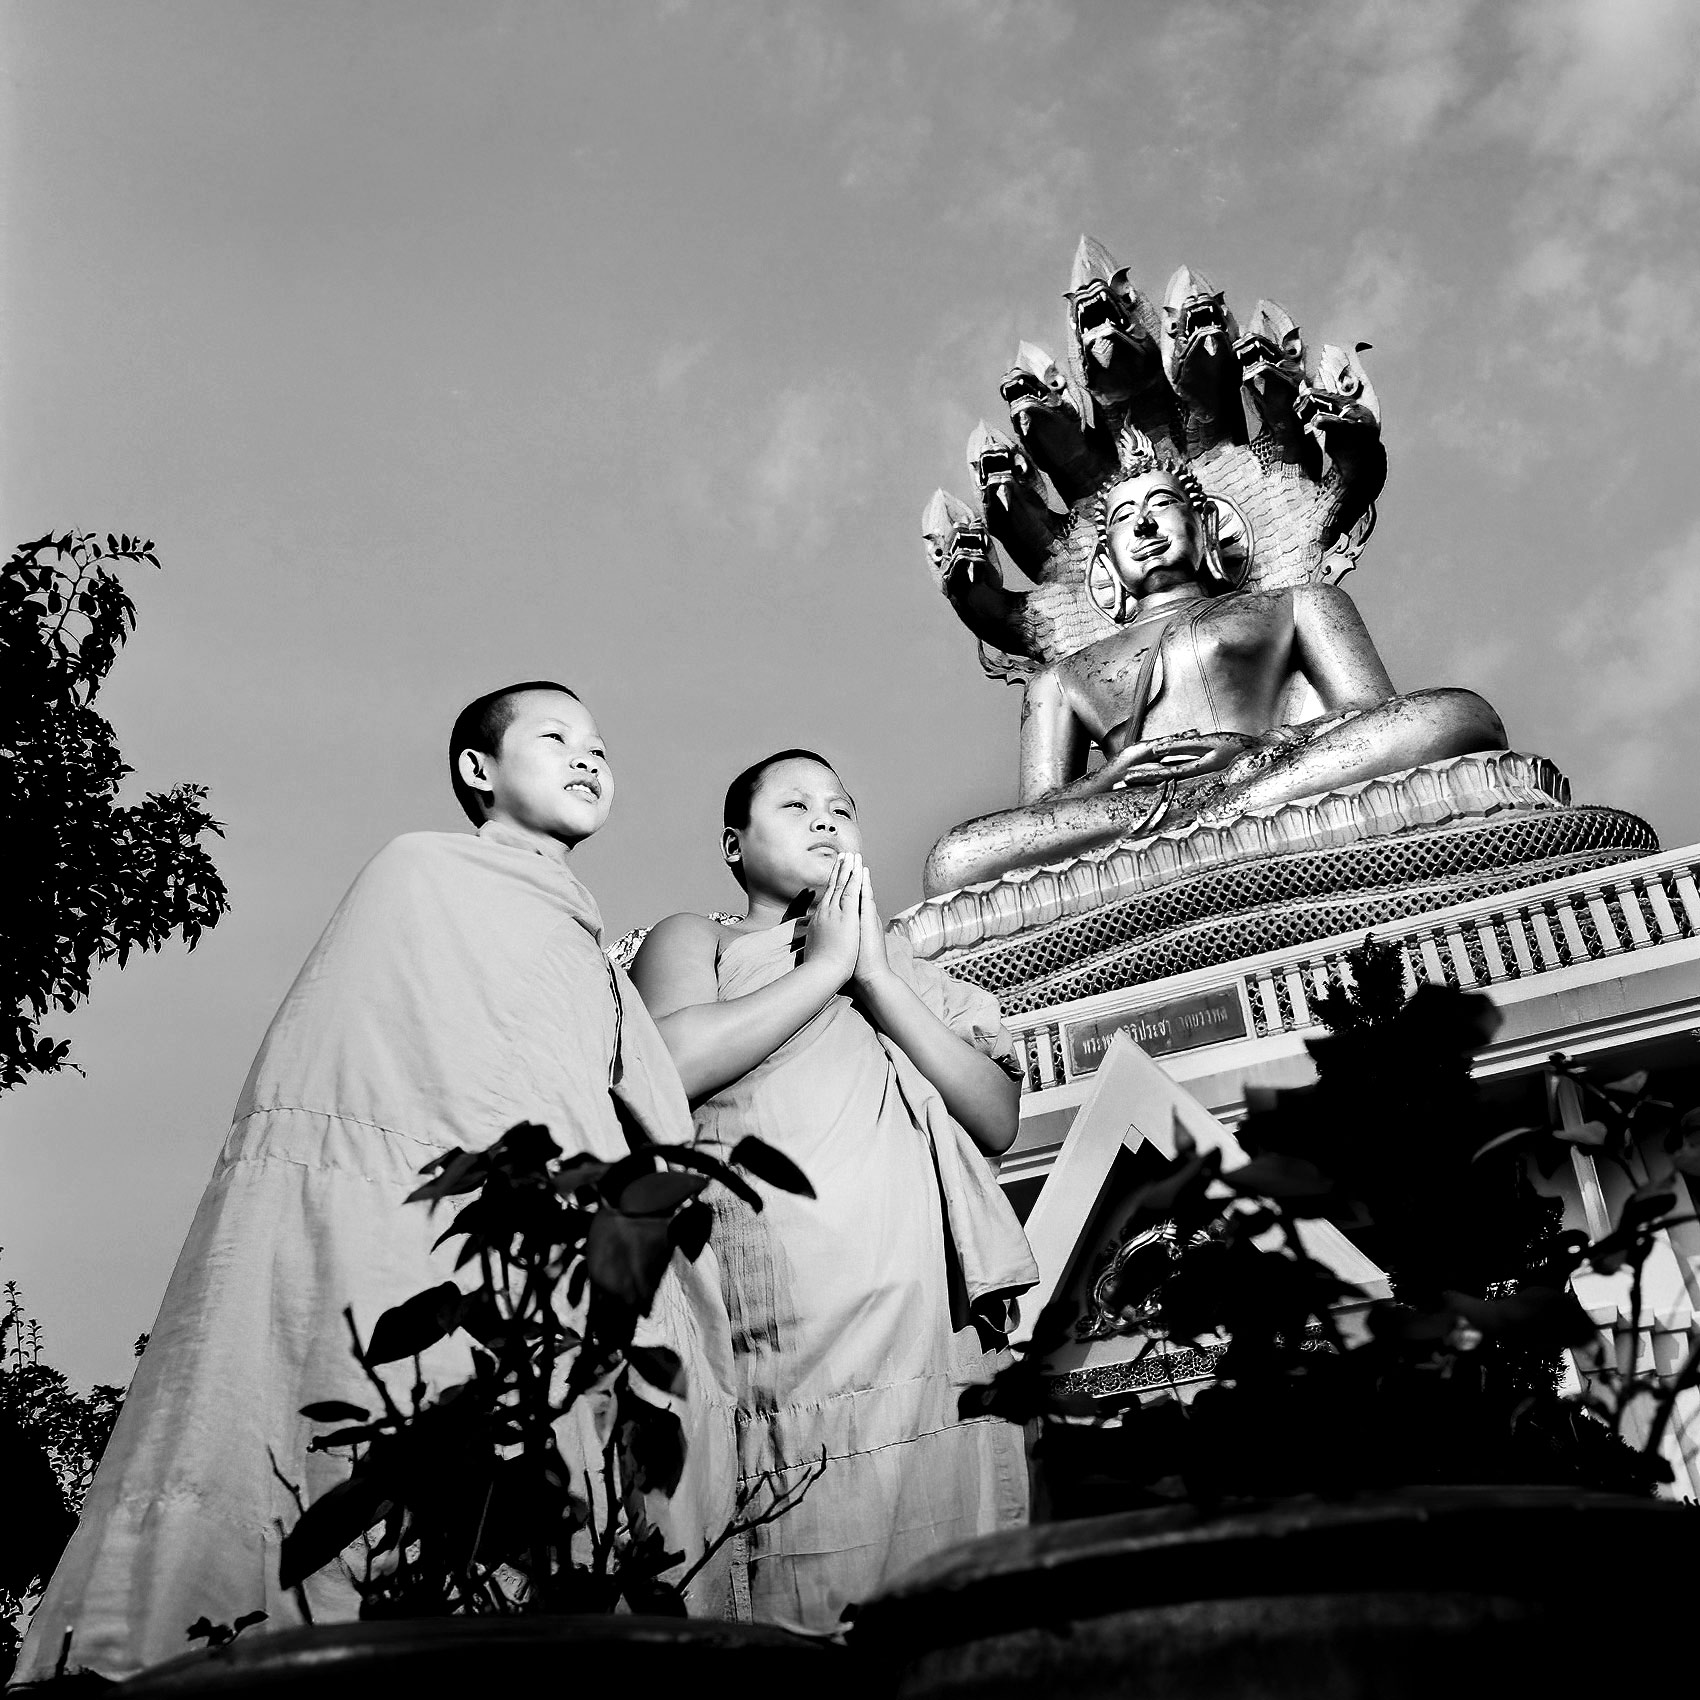 two-thai-monks-prepare-to-pray-in-the-early-morning-at-a-temple-in-chang-rai-thailand